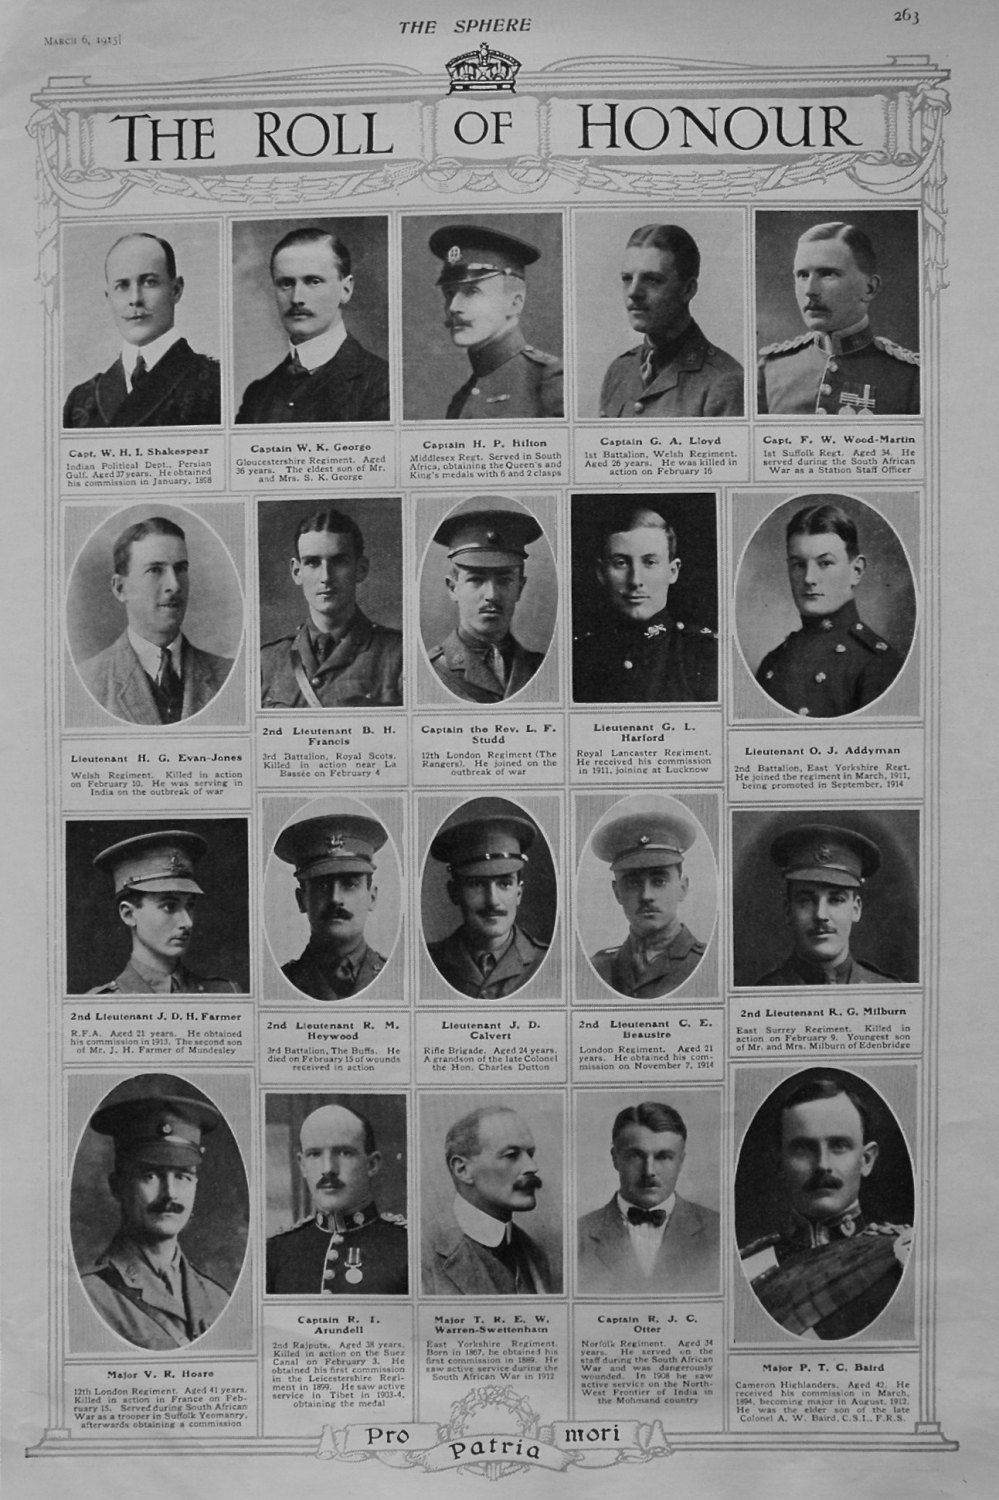 The Roll of Honour. March 6th 1915, 